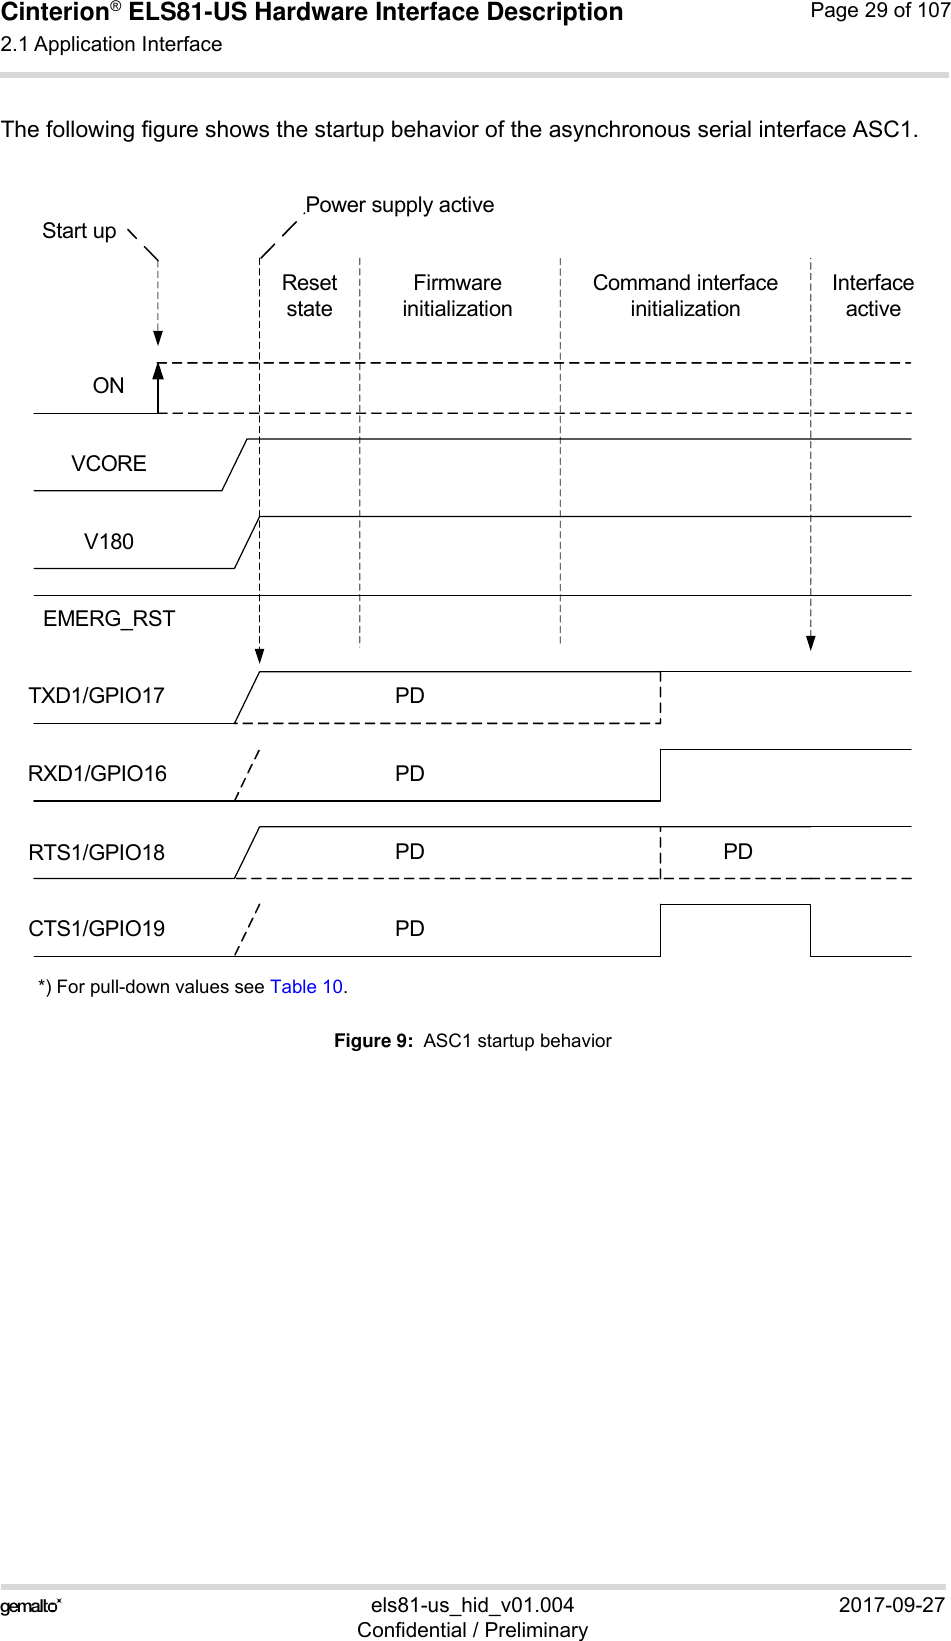 Cinterion® ELS81-US Hardware Interface Description2.1 Application Interface53els81-us_hid_v01.004 2017-09-27Confidential / PreliminaryPage 29 of 107The following figure shows the startup behavior of the asynchronous serial interface ASC1.*) For pull-down values see Table 10.Figure 9:  ASC1 startup behaviorTXD1/GPIO17RXD1/GPIO16RTS1/GPIO18CTS1/GPIO19ONEMERG_RSTPDPDPDPDPower supply activeStart upFirmware initializationCommand interface initializationInterface activeResetstateV180VCOREPD